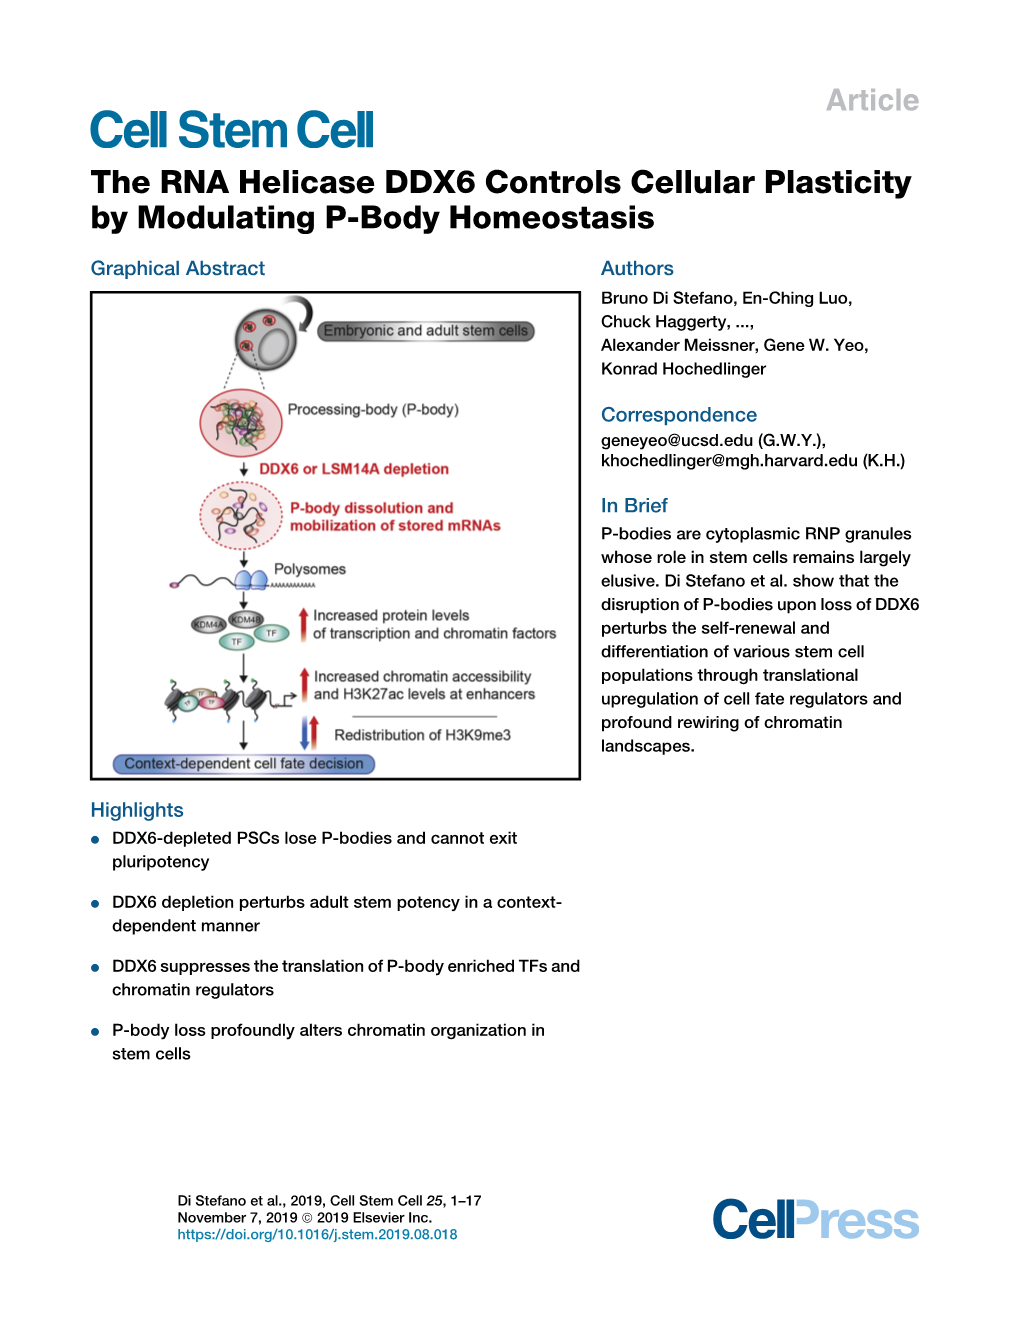 The RNA Helicase DDX6 Controls Cellular Plasticity by Modulating P-Body Homeostasis